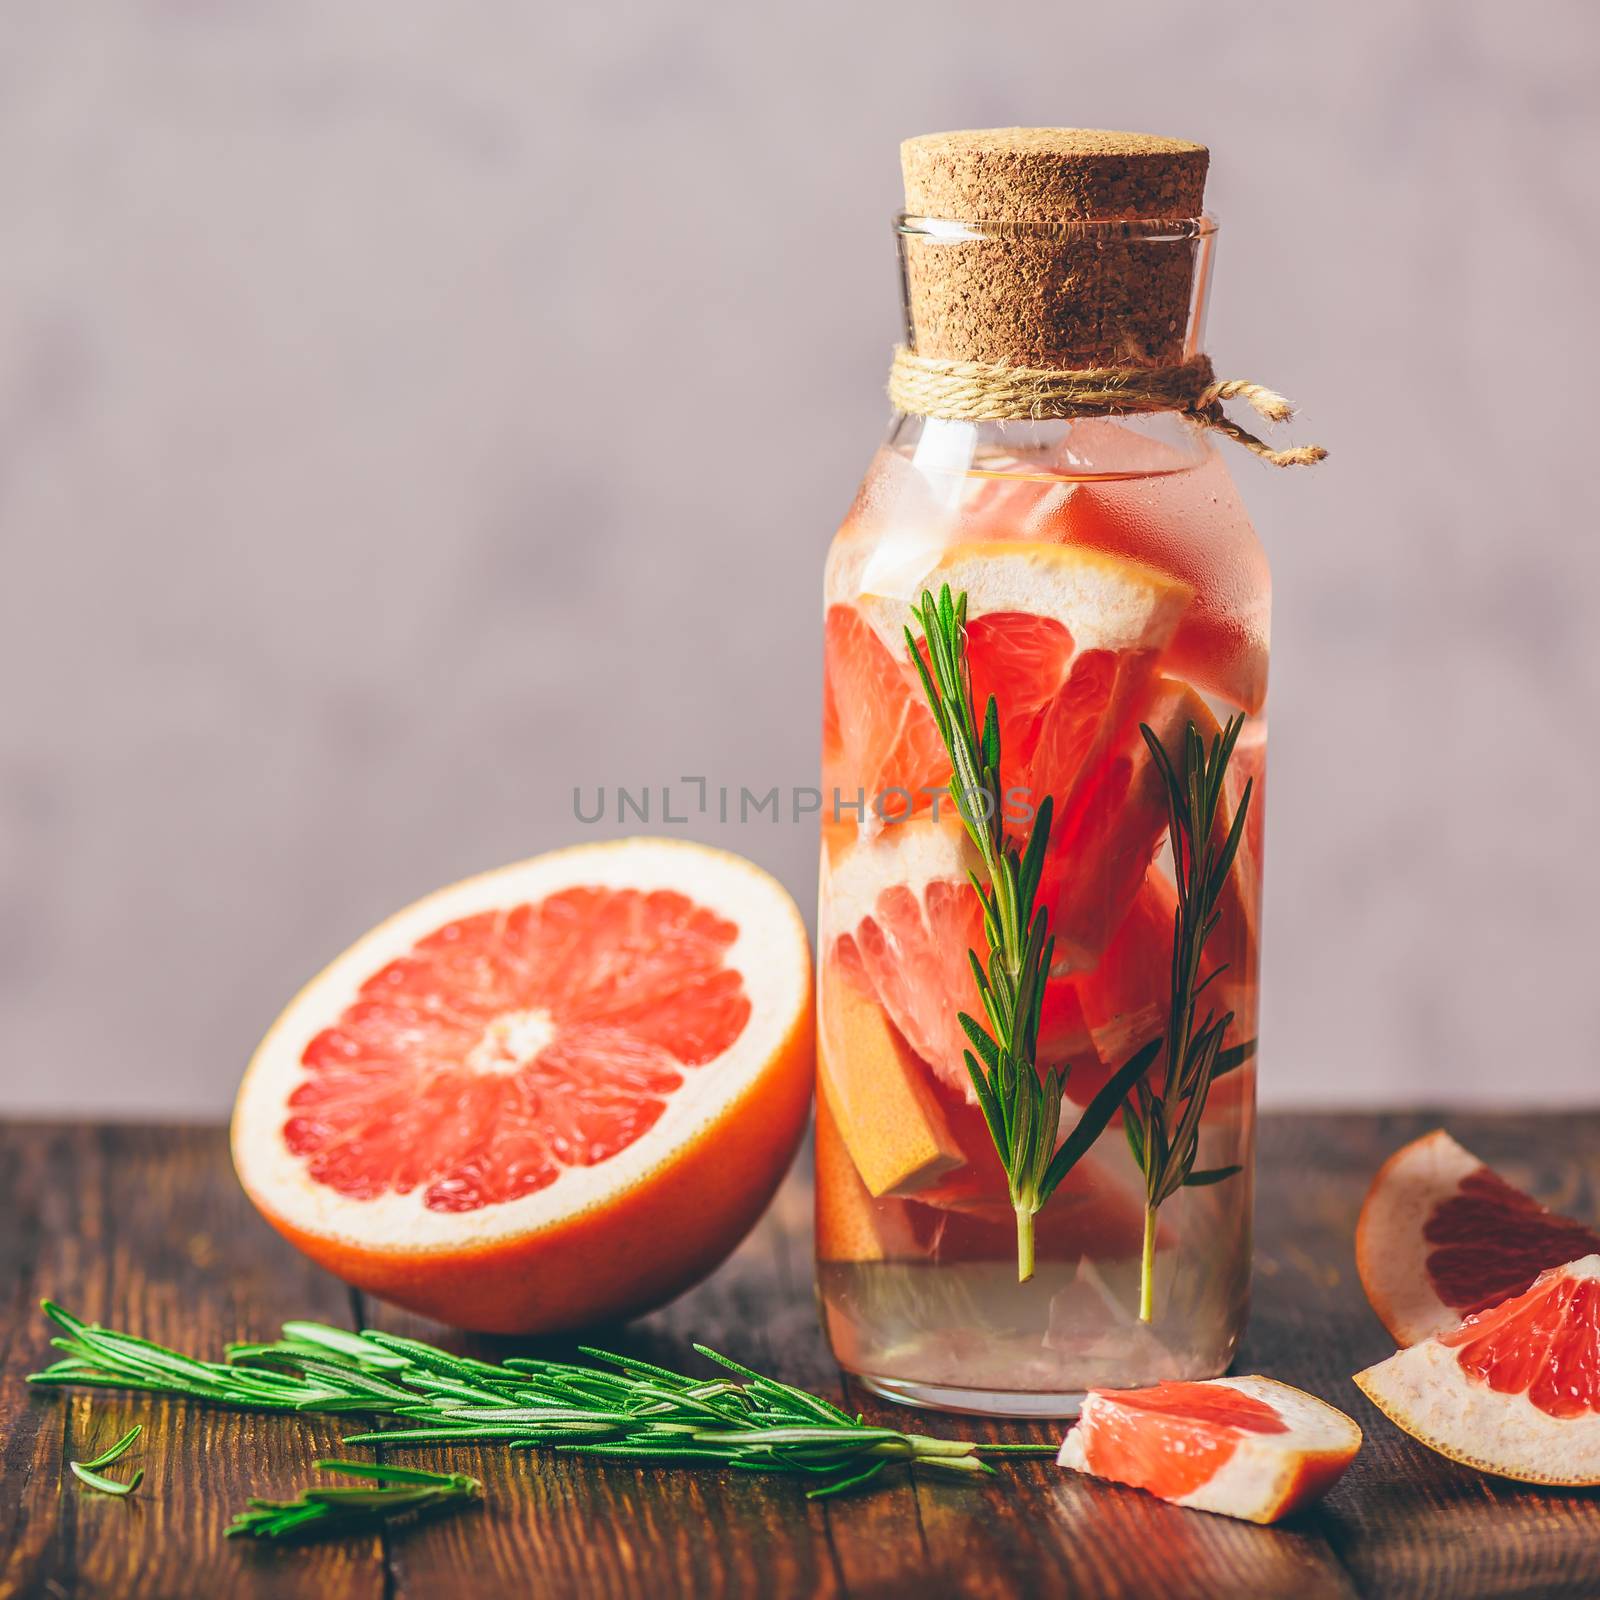 Bottle of Detox Water Infused with Sliced Raw Grapefruit and Fresh Springs of Rosemary. And Ingredients on Wooden Table.